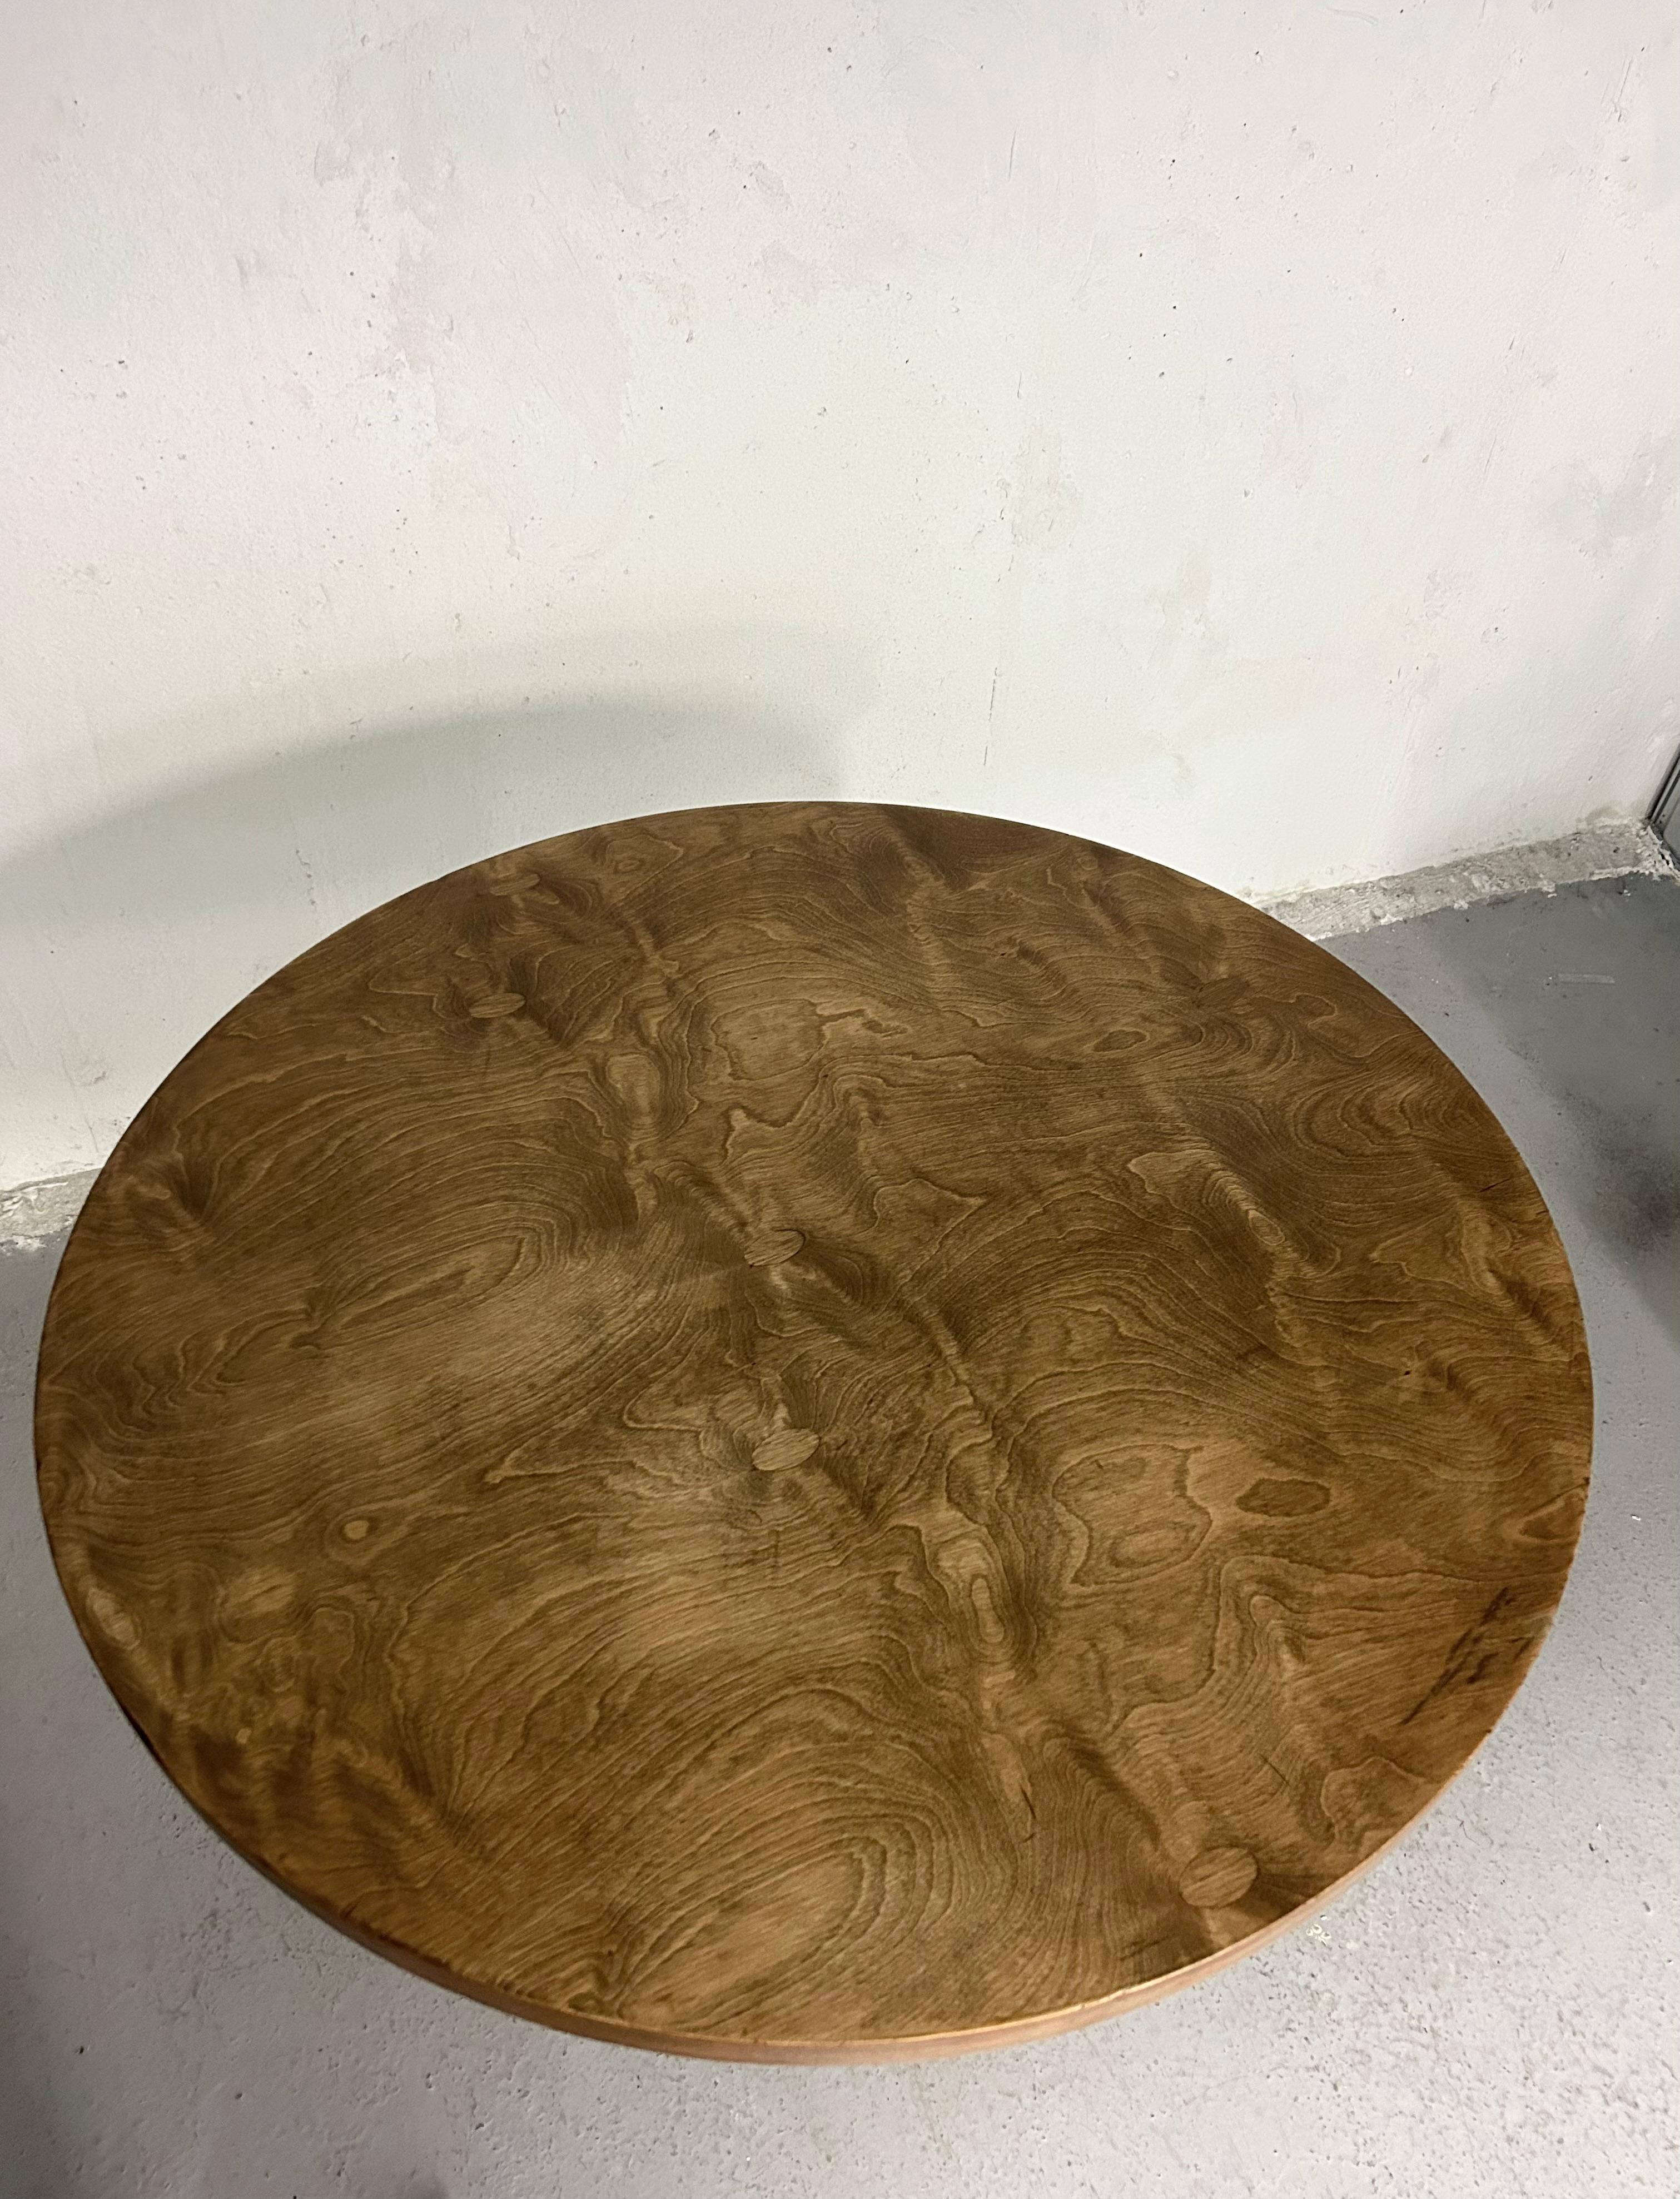 Vintage pedestal dining table. Burl wood veneer top with chrome pedestal base that sits in an aluminum stand. Minimal wear. Some very small knicks in the edge of the table top, normal wear to aluminum stand.